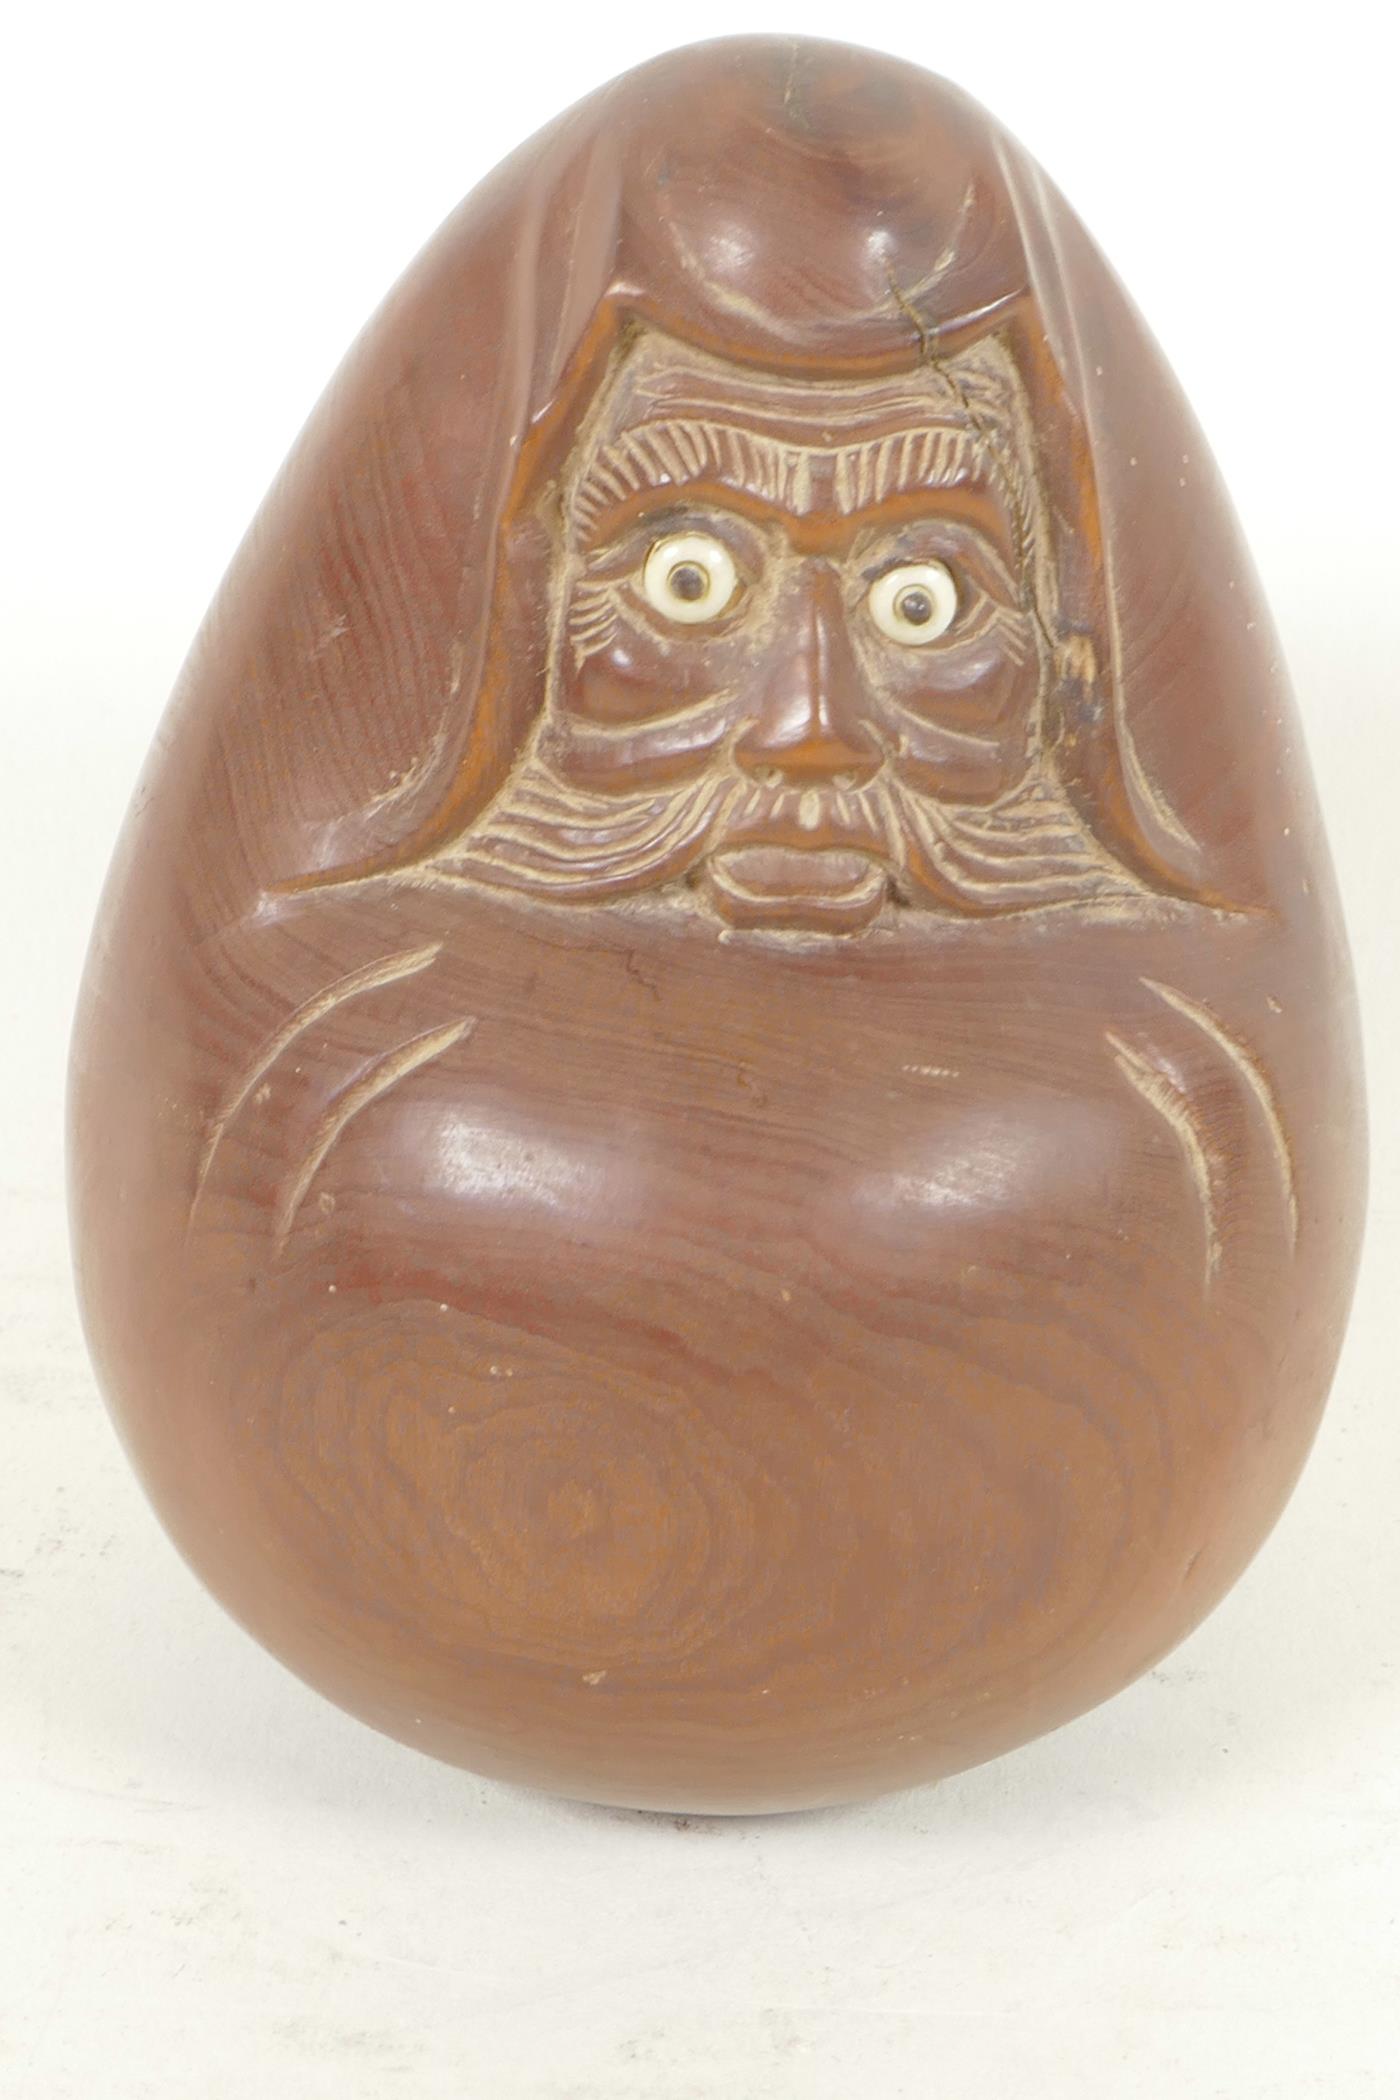 A Japanese carved hardwood okimono figure of a rounded man with bone and glass eyes, character